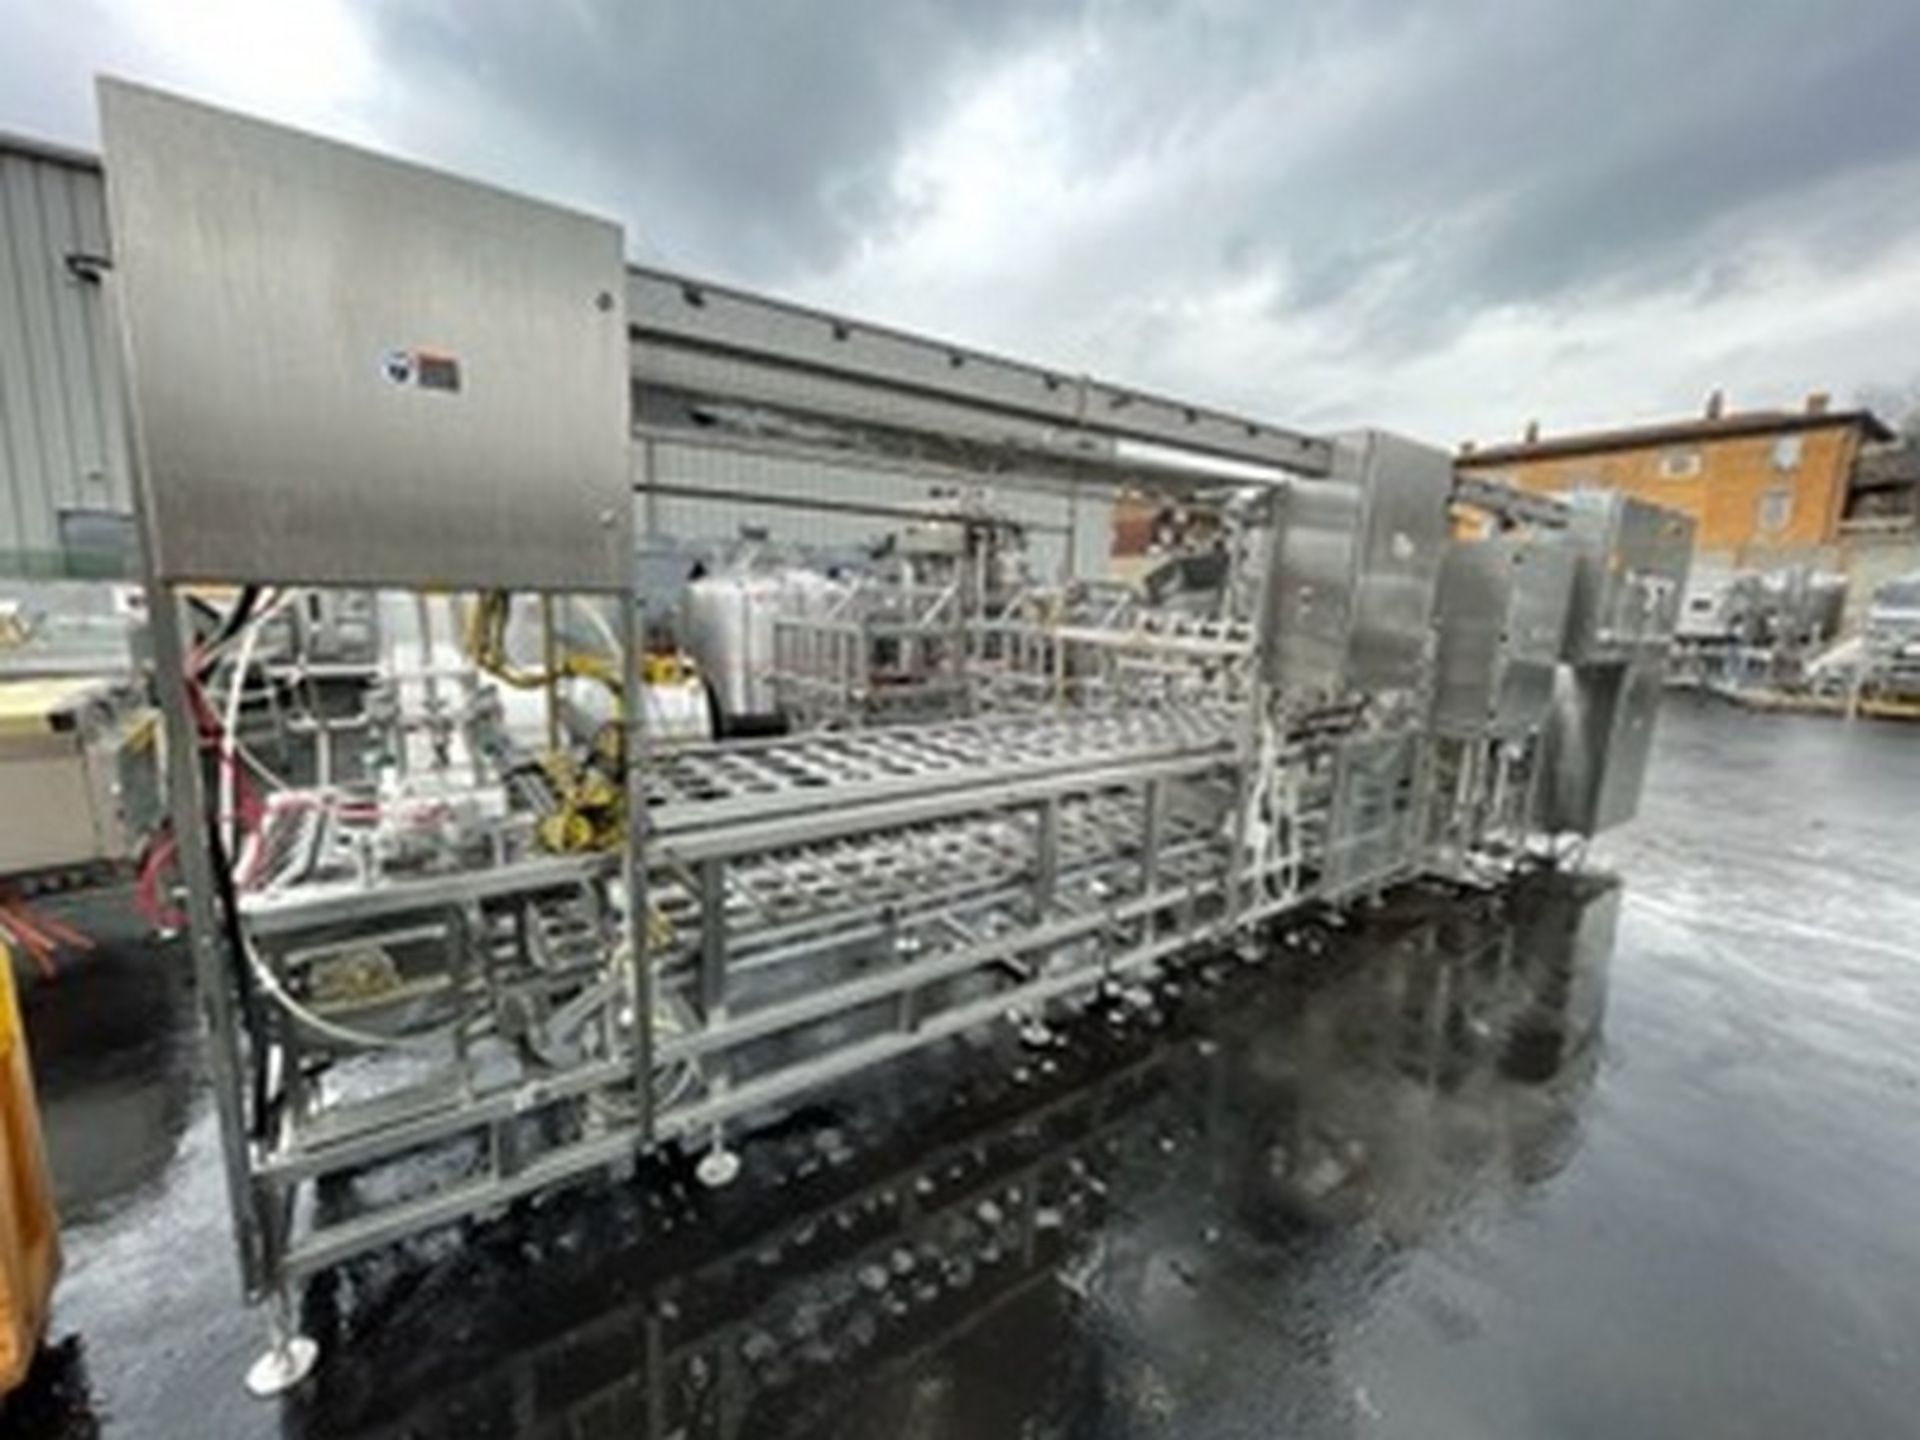 Osgood 4-Lane In-Line S/S Cup Filler,M/N 4800-E, S/N 351-840, Set Up with 3-5/8" W On-Board Change - Image 12 of 18